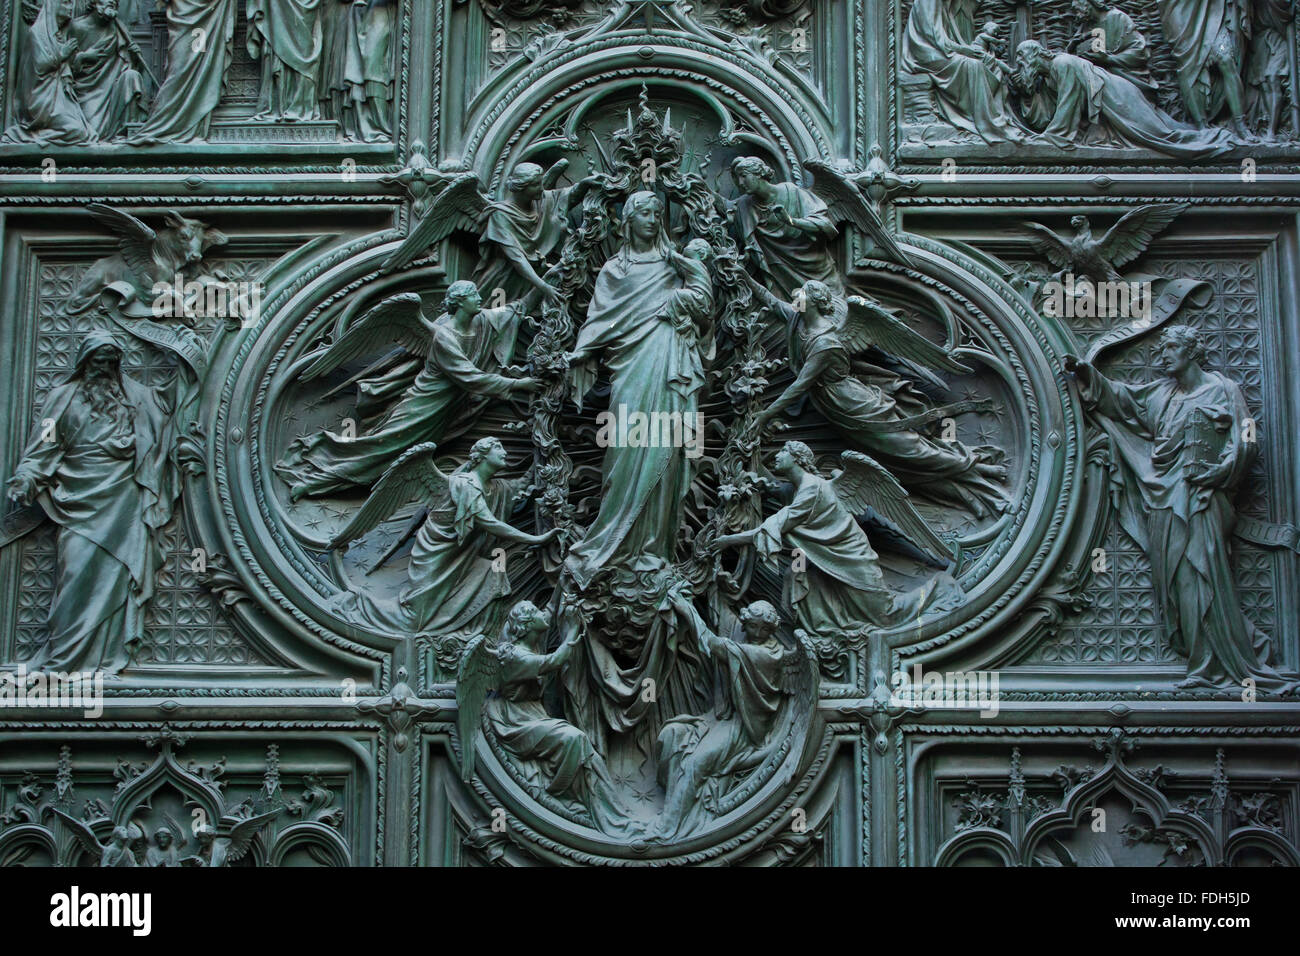 Assumption of the Virgin Mary. Detail of the main bronze door of the Milan Cathedral (Duomo di Milano) in Milan, Italy. Evangeli Stock Photo